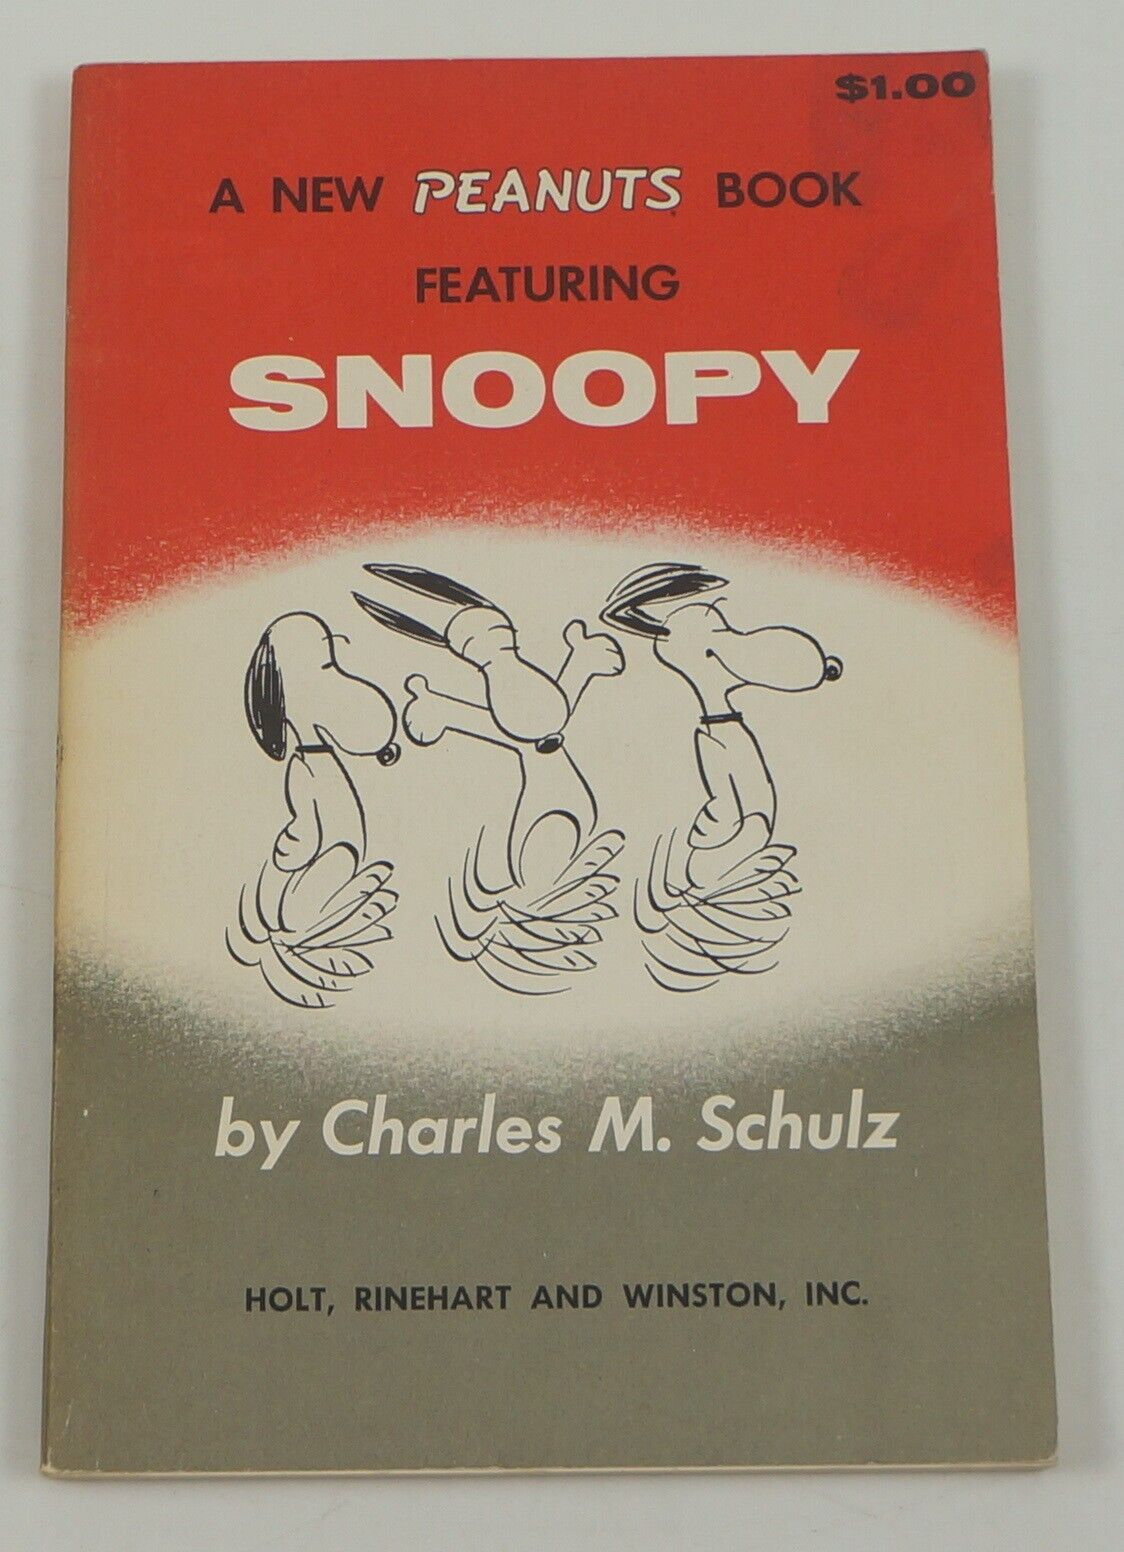 A New Peanuts Book Featuring Snoopy SC by Charles M. Schulz 1968 Charlie Brown